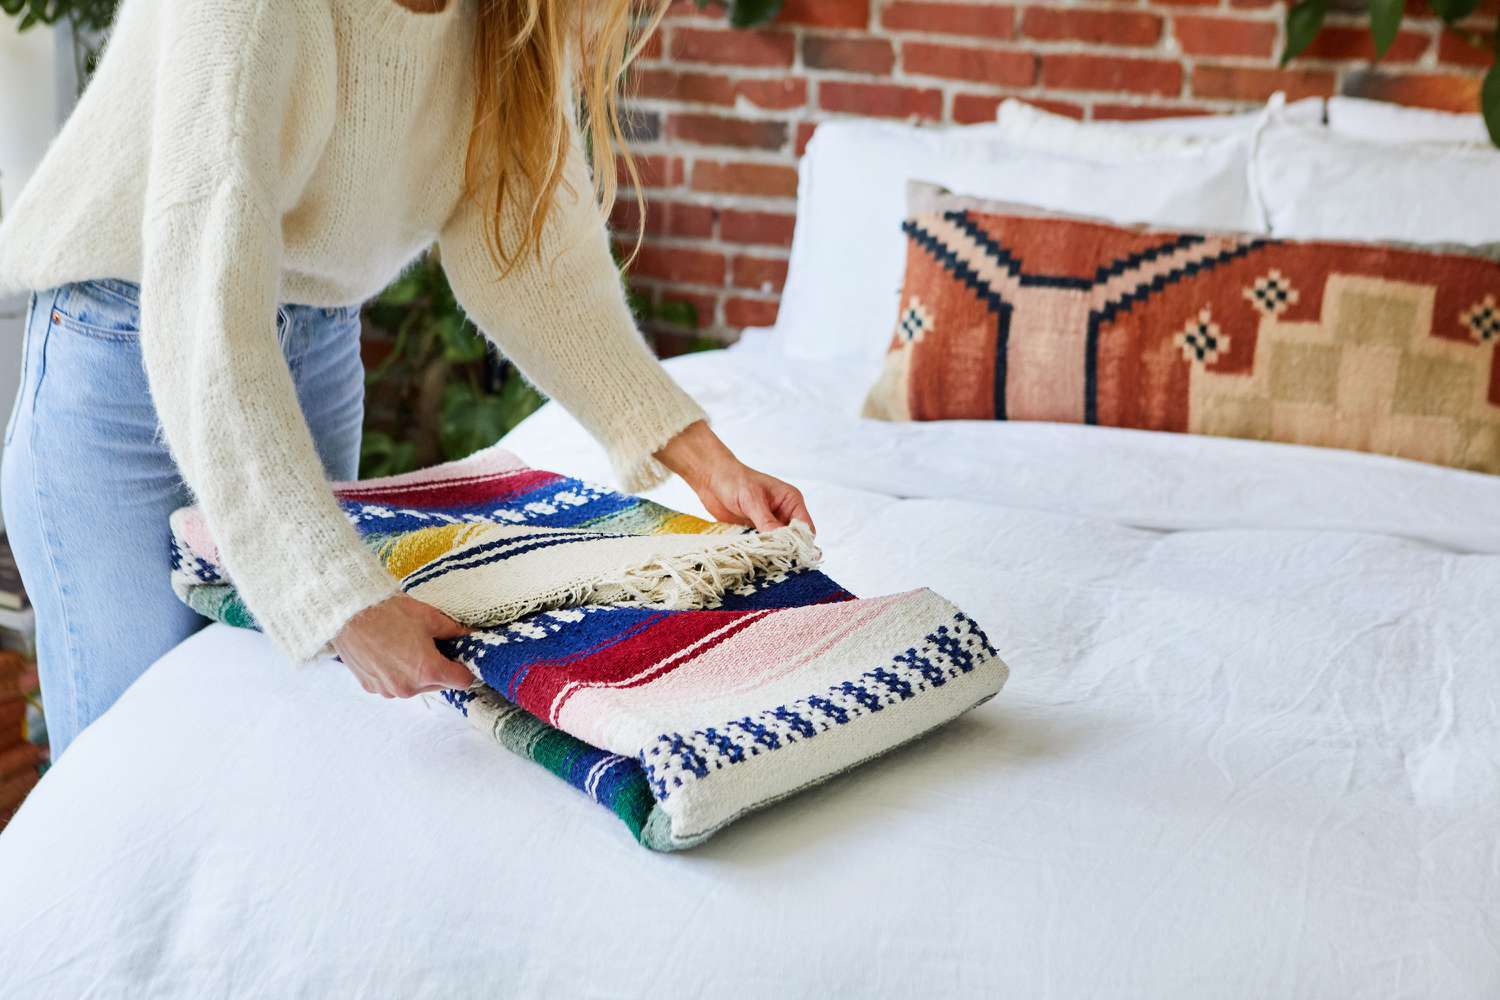 Bulky patterned blanket folded as long rectangle on bed